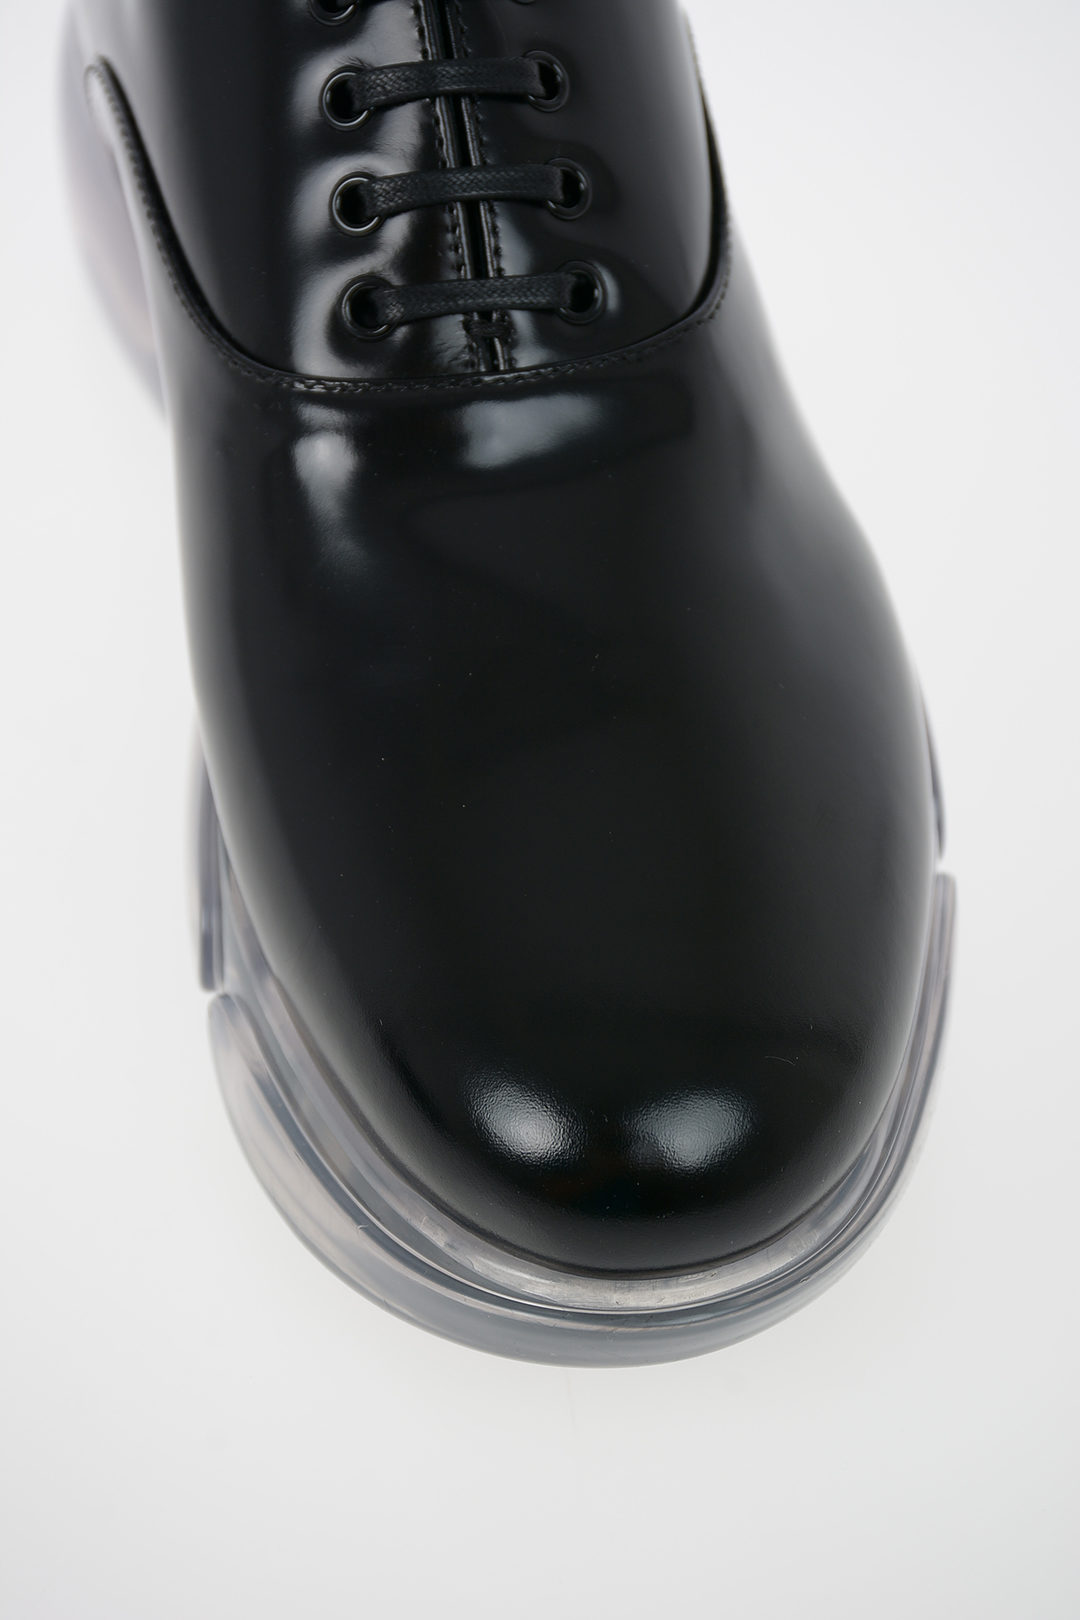 Prada Brushed Leather Derby Shoes women - Glamood Outlet